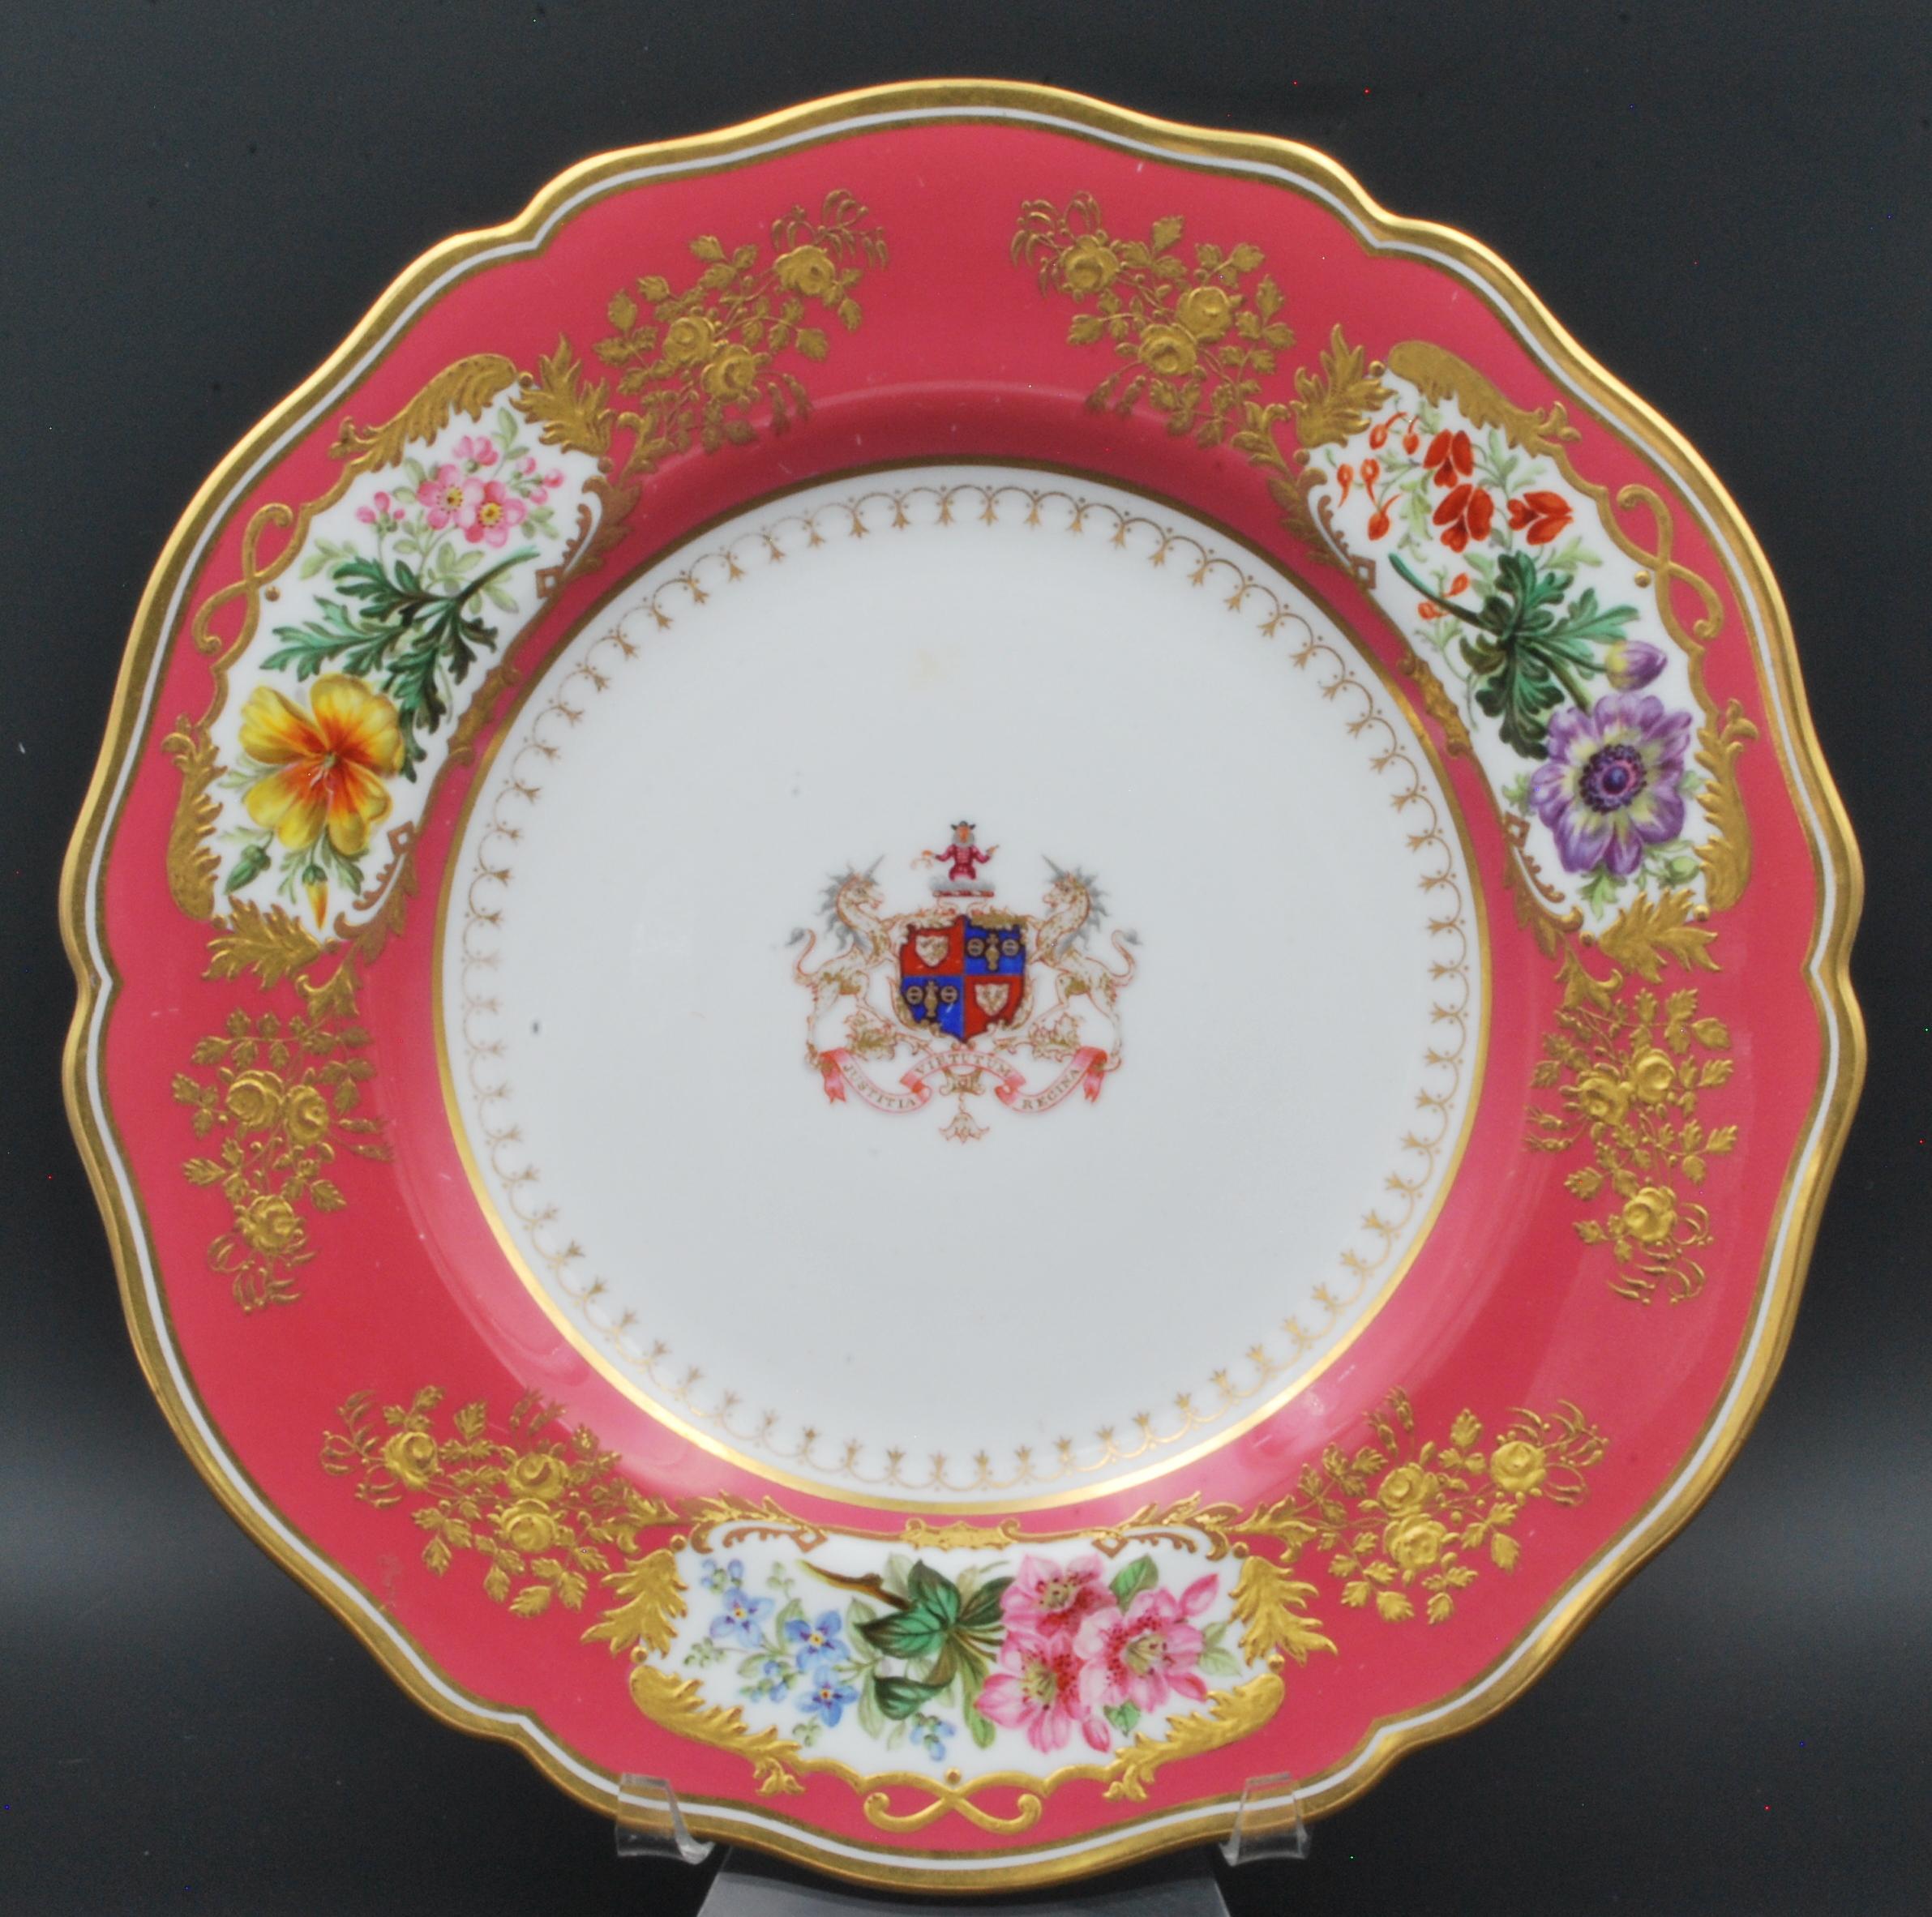 An exceptionally fine display plate, featuring the arms of The Goldsmith's Company. 

The plate is lavishly decorated. The pink ground is made using a compound of gold, and is the most expensive colour to be found on porcelain. On this will be